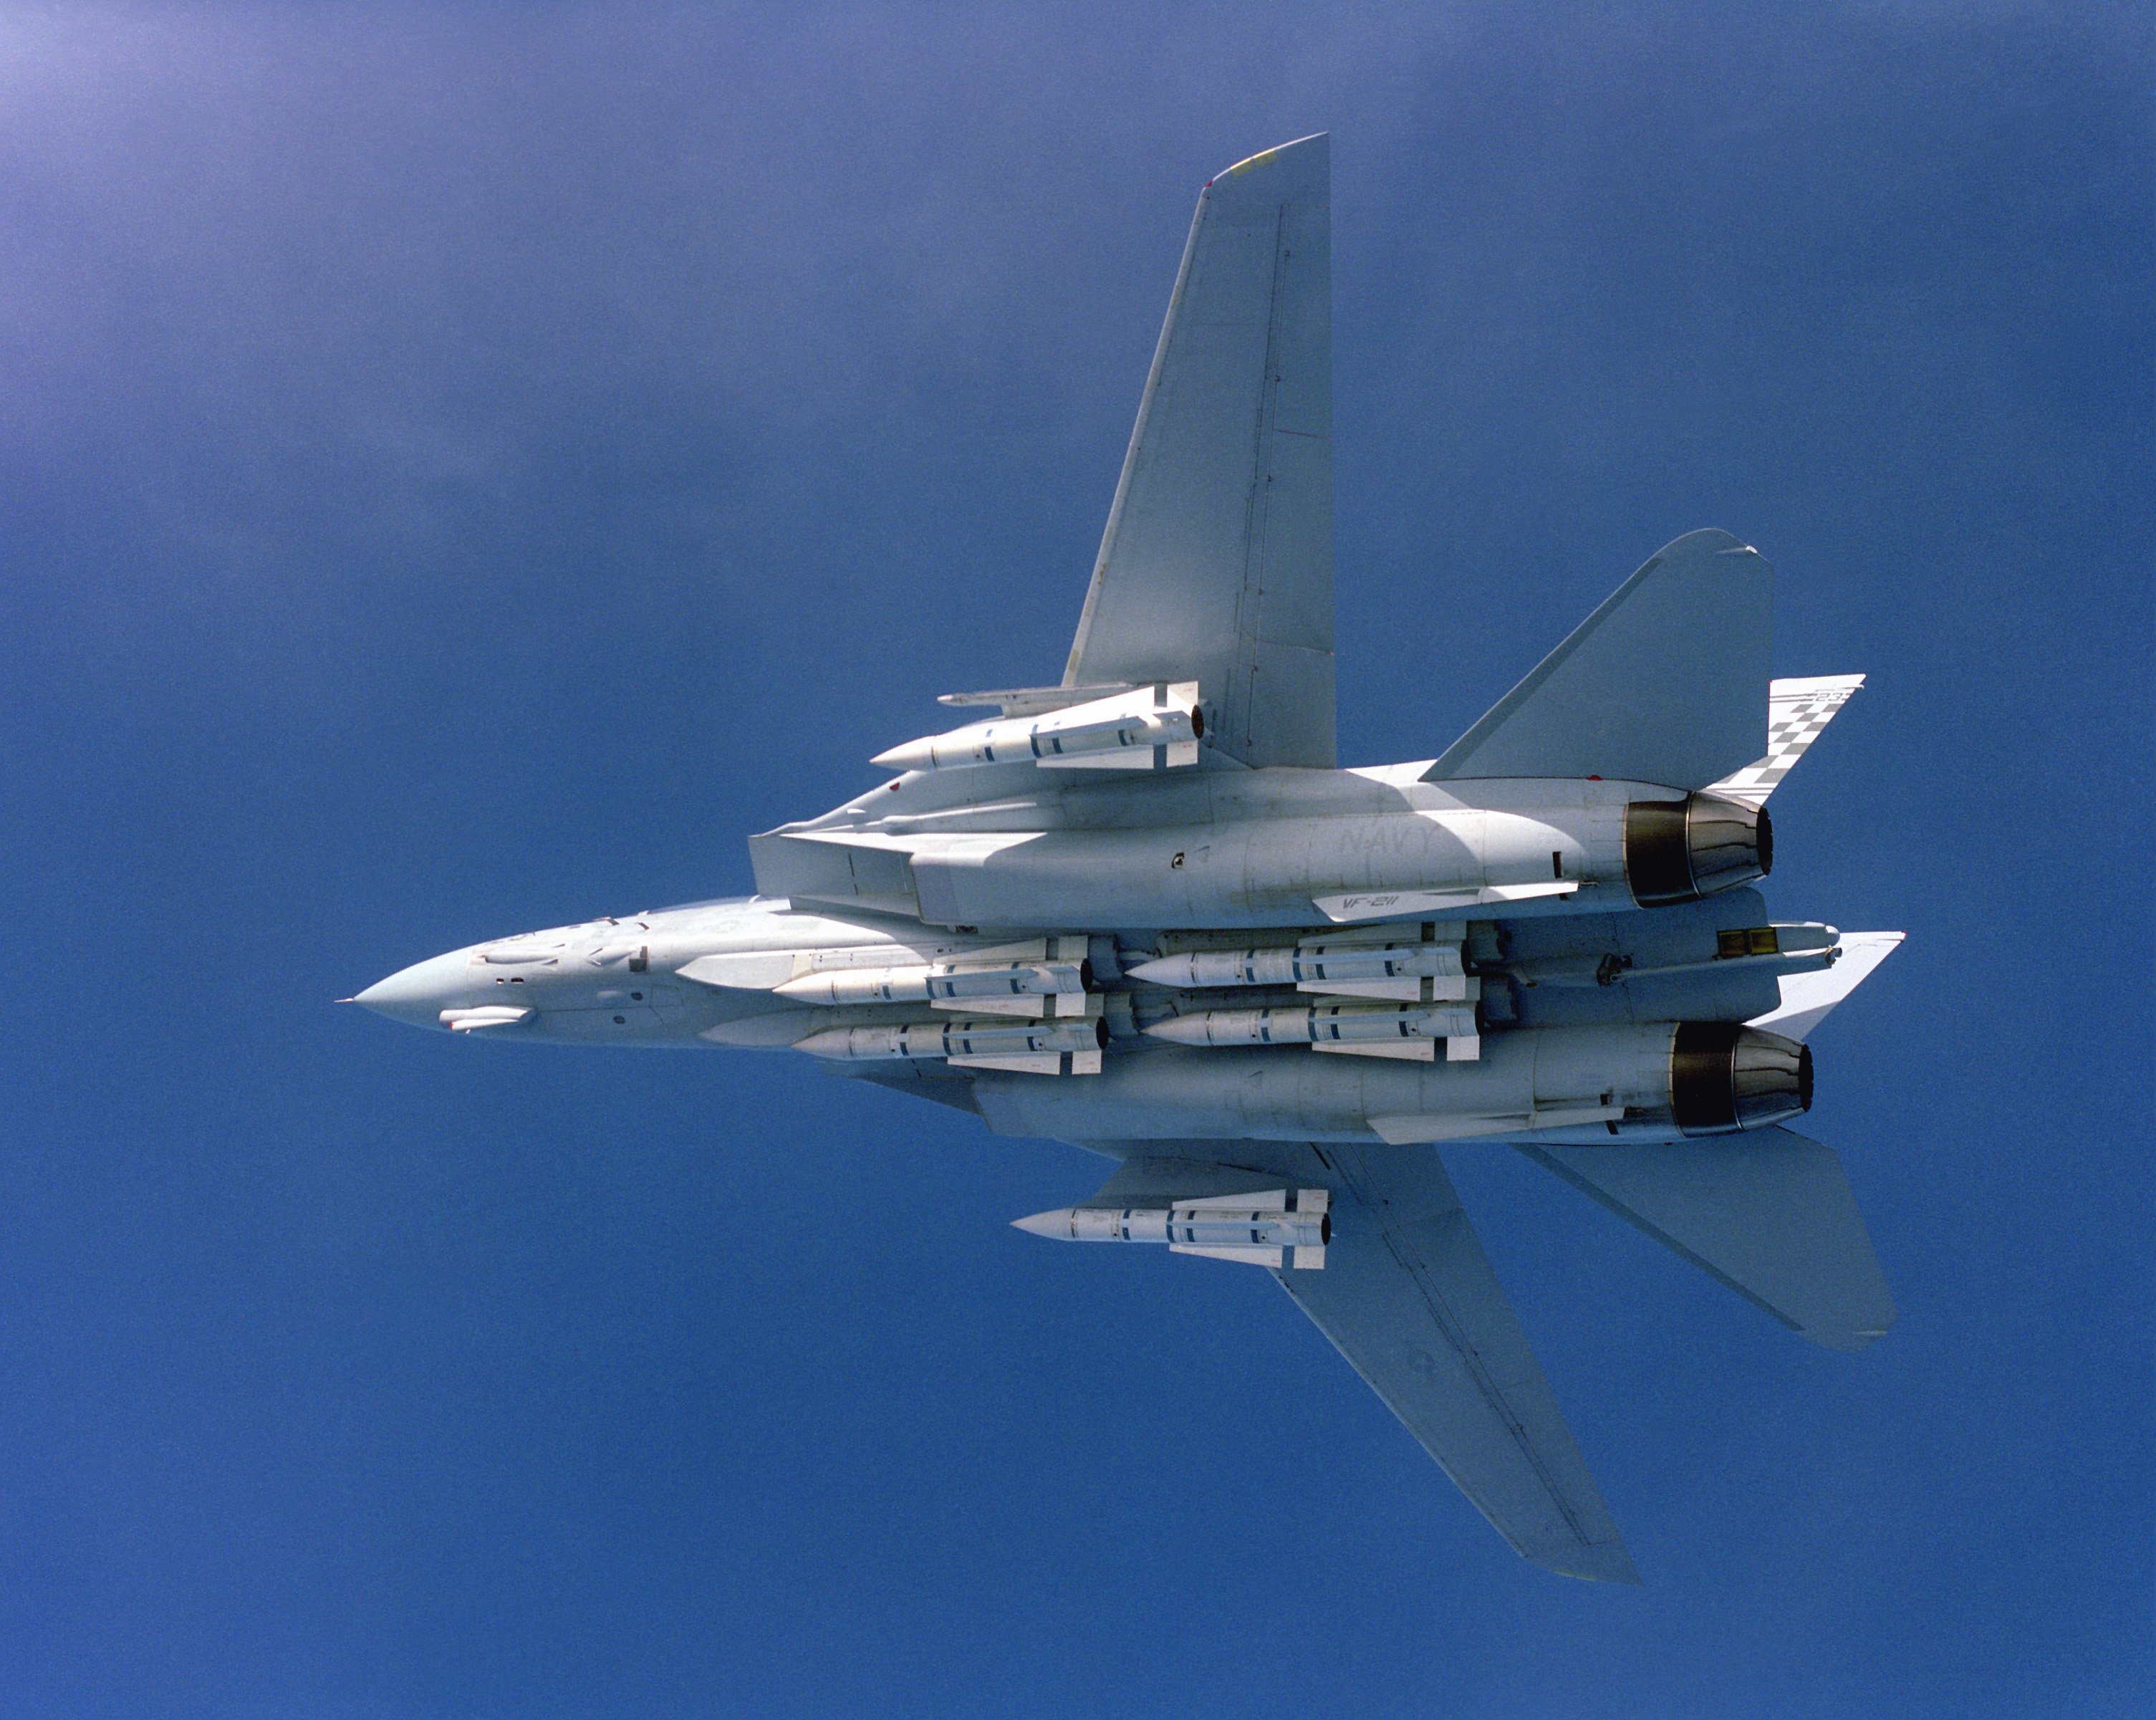 An Air To Air Underside View Of A Fighter Squadron 211 Vf 211 Grumman F 14a Tomcat Aircraft With All Six Of Its Aim 54 Phoenix Missiles Visible 3010 2401 Militaryporn